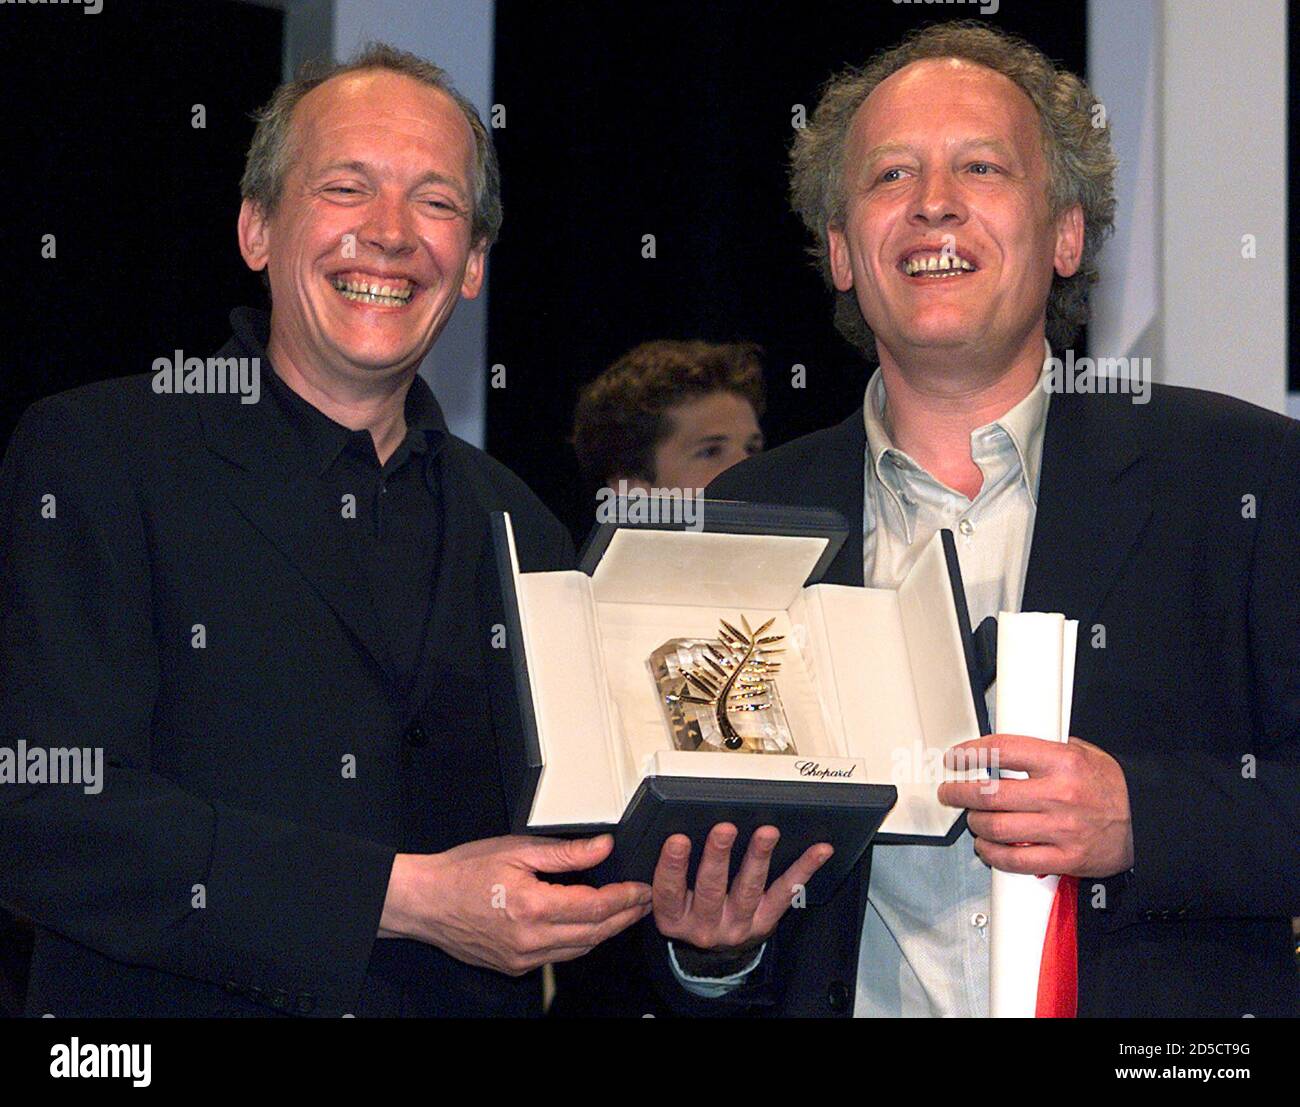 Belgian directors Luc (L) and Jean-Pierre (R) Dardenne smile as they hold  their Palme d'Or for their film "Rosetta" during the closing ceremonies at  the 52nd Cannes Film Festival May 23. Belgian